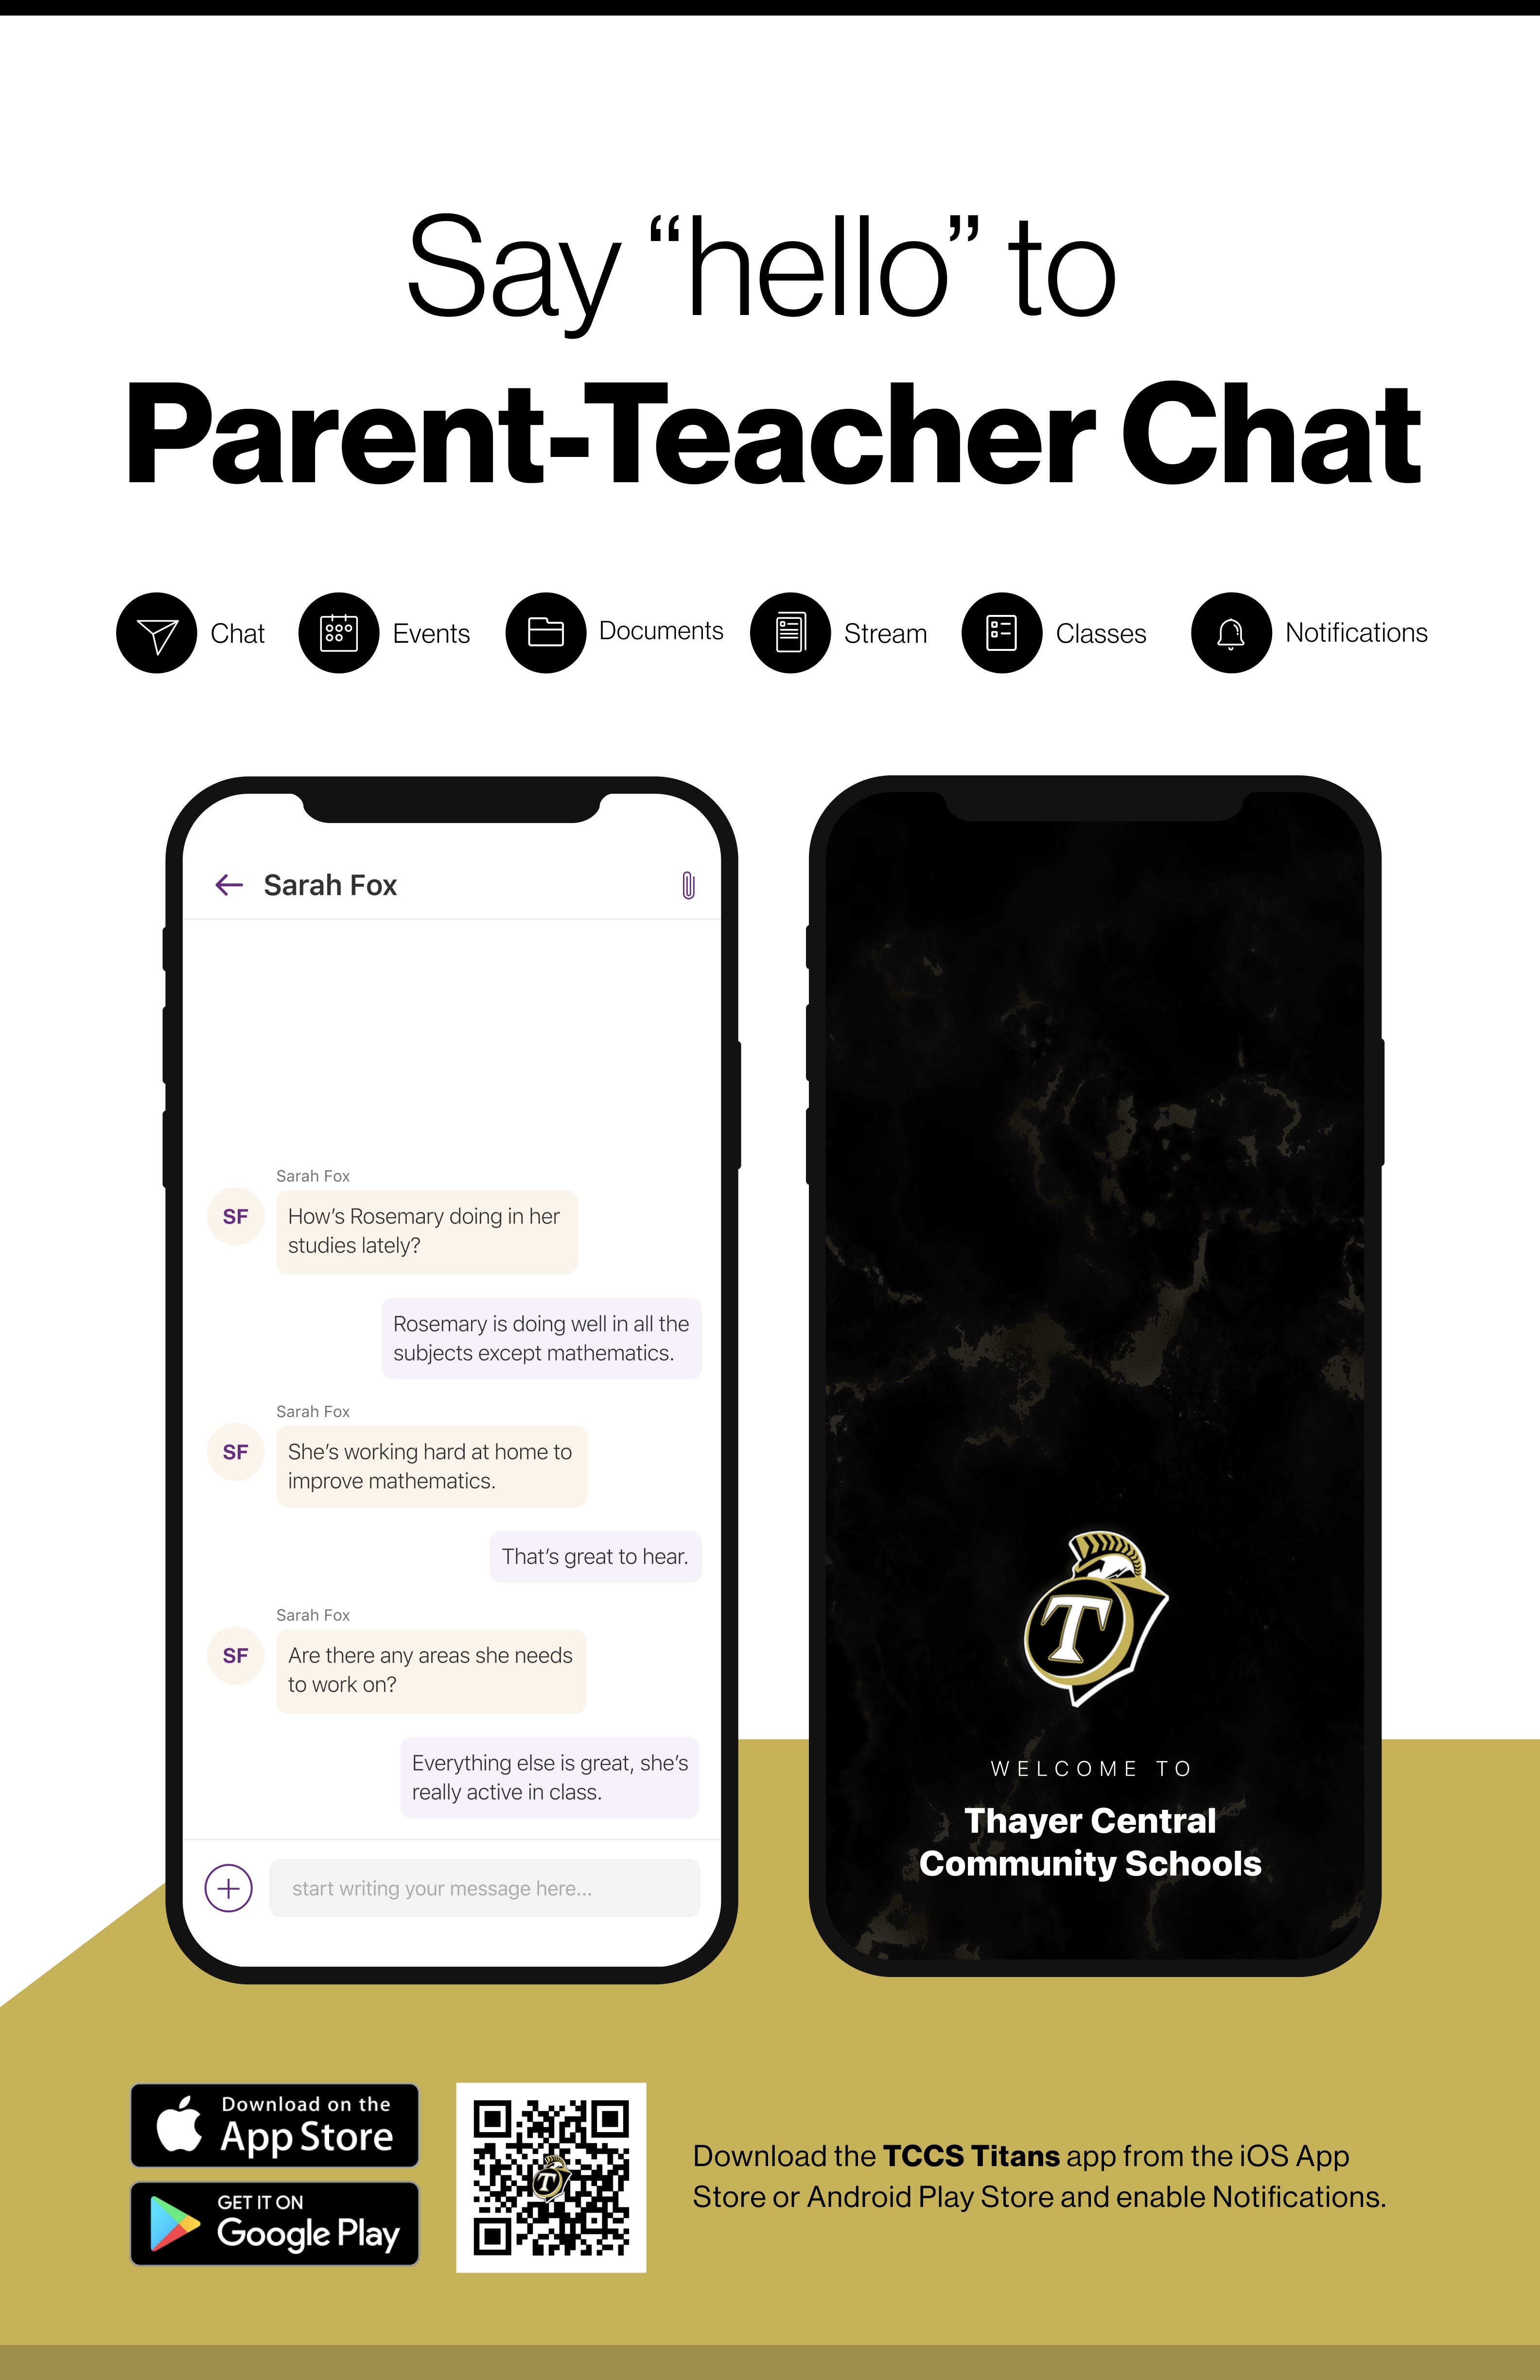 Say hello to Parent-Teacher chat in the new Rooms app. Download the Thayer Central Community Schools app in the Google Play or Apple App store.